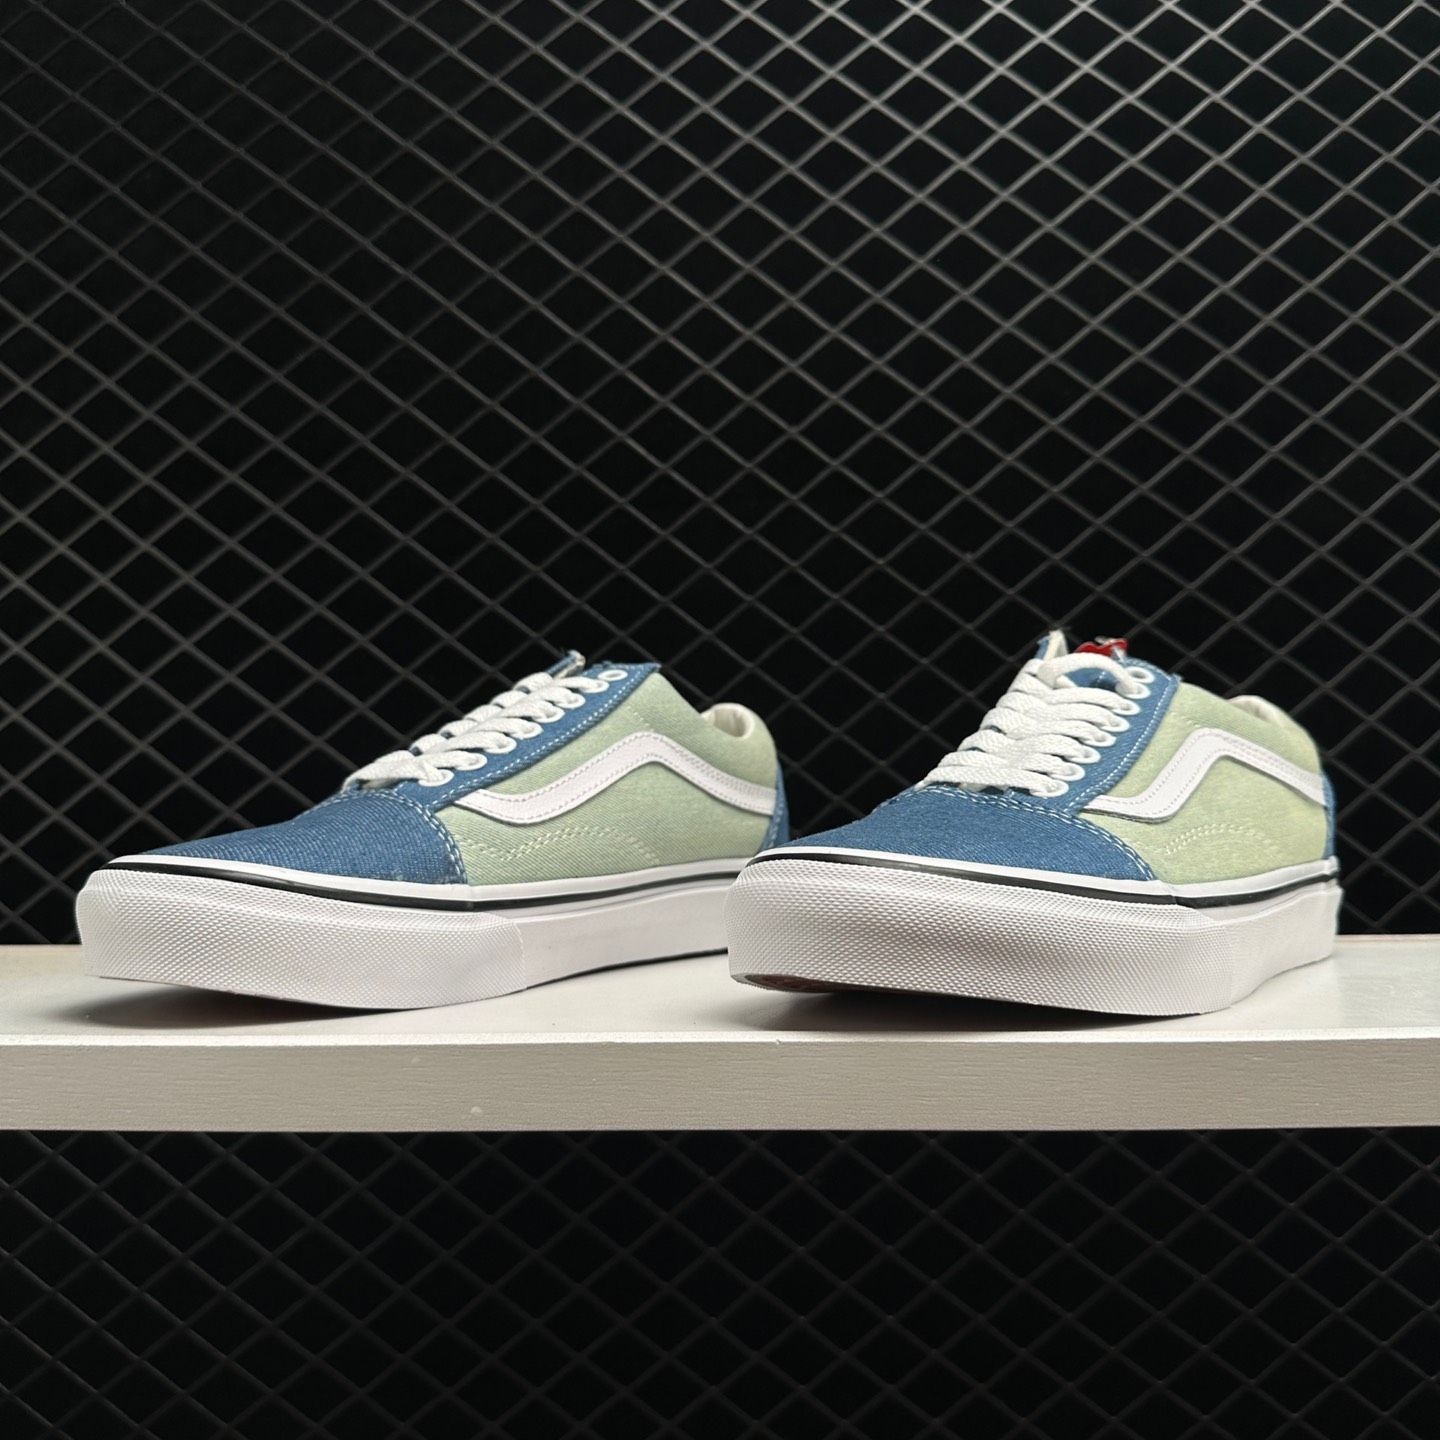 Vans Old Skool 36 DX Gray Green White - Stylish and Classic Sneakers